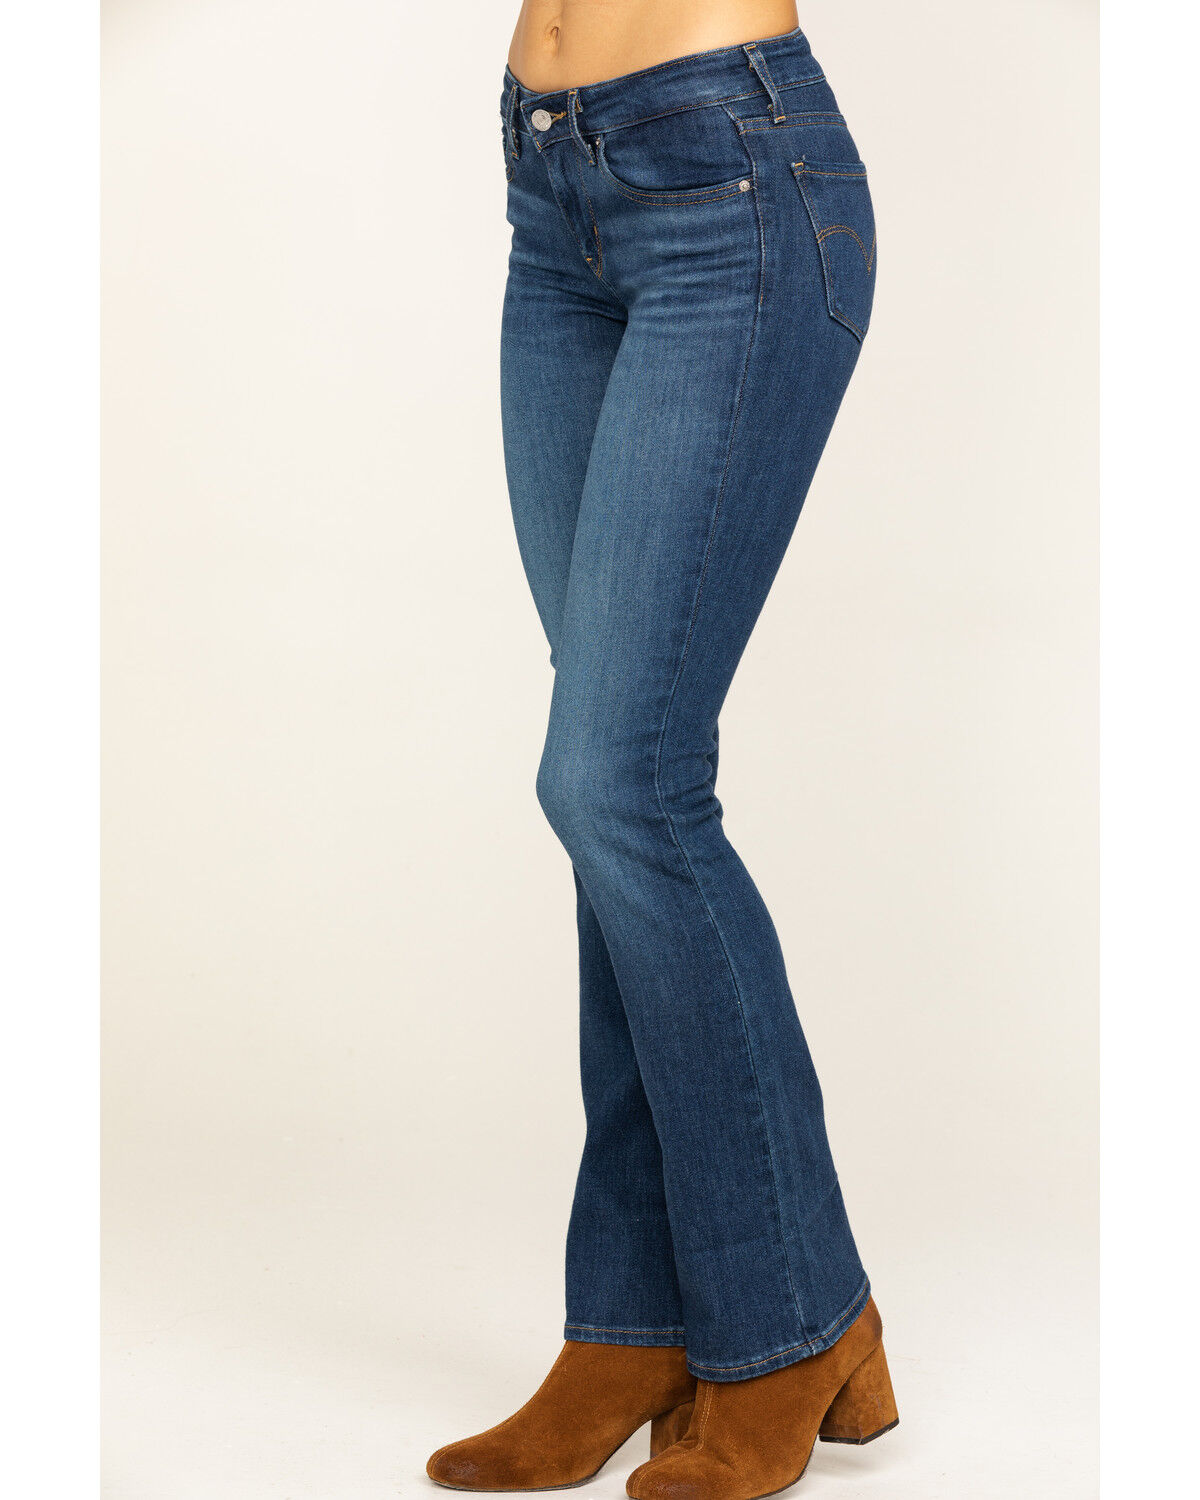 levi's jeans bootcut womens